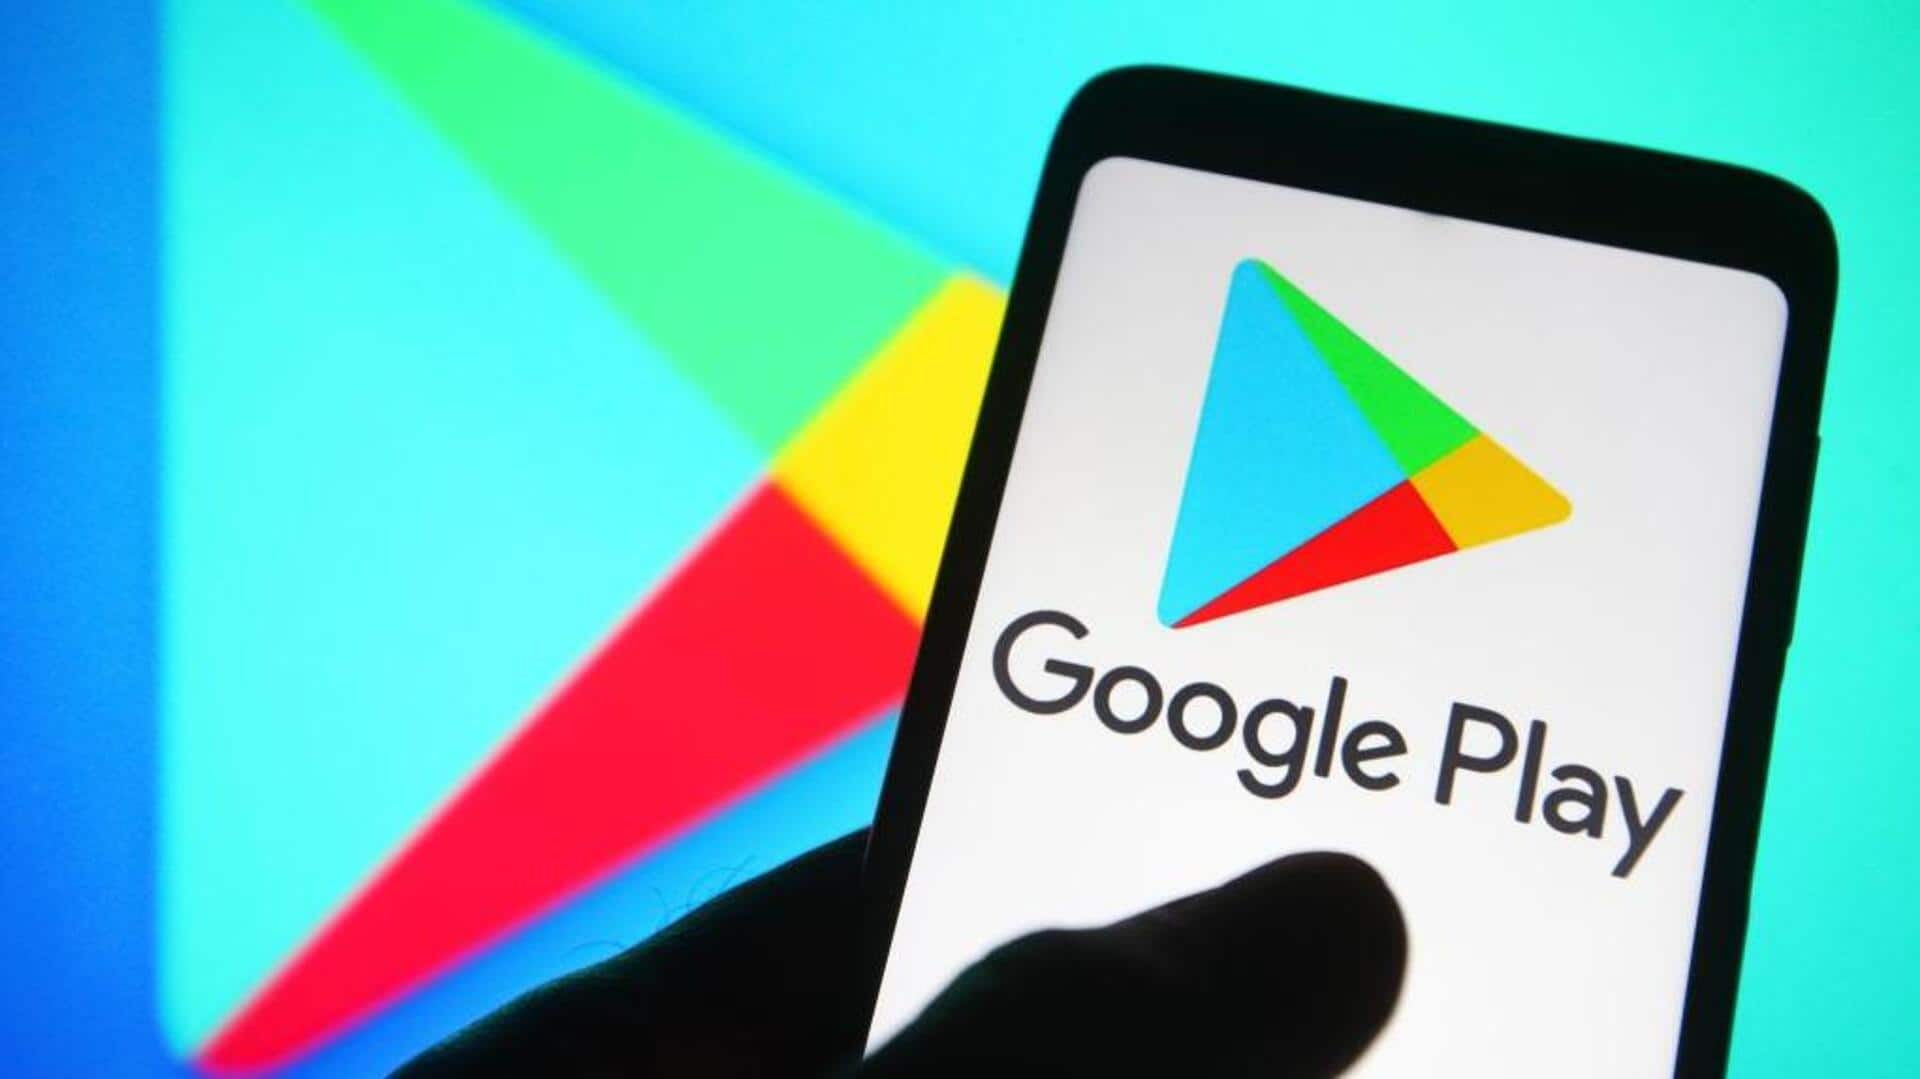 Google sets new rules for AI apps on Play Store